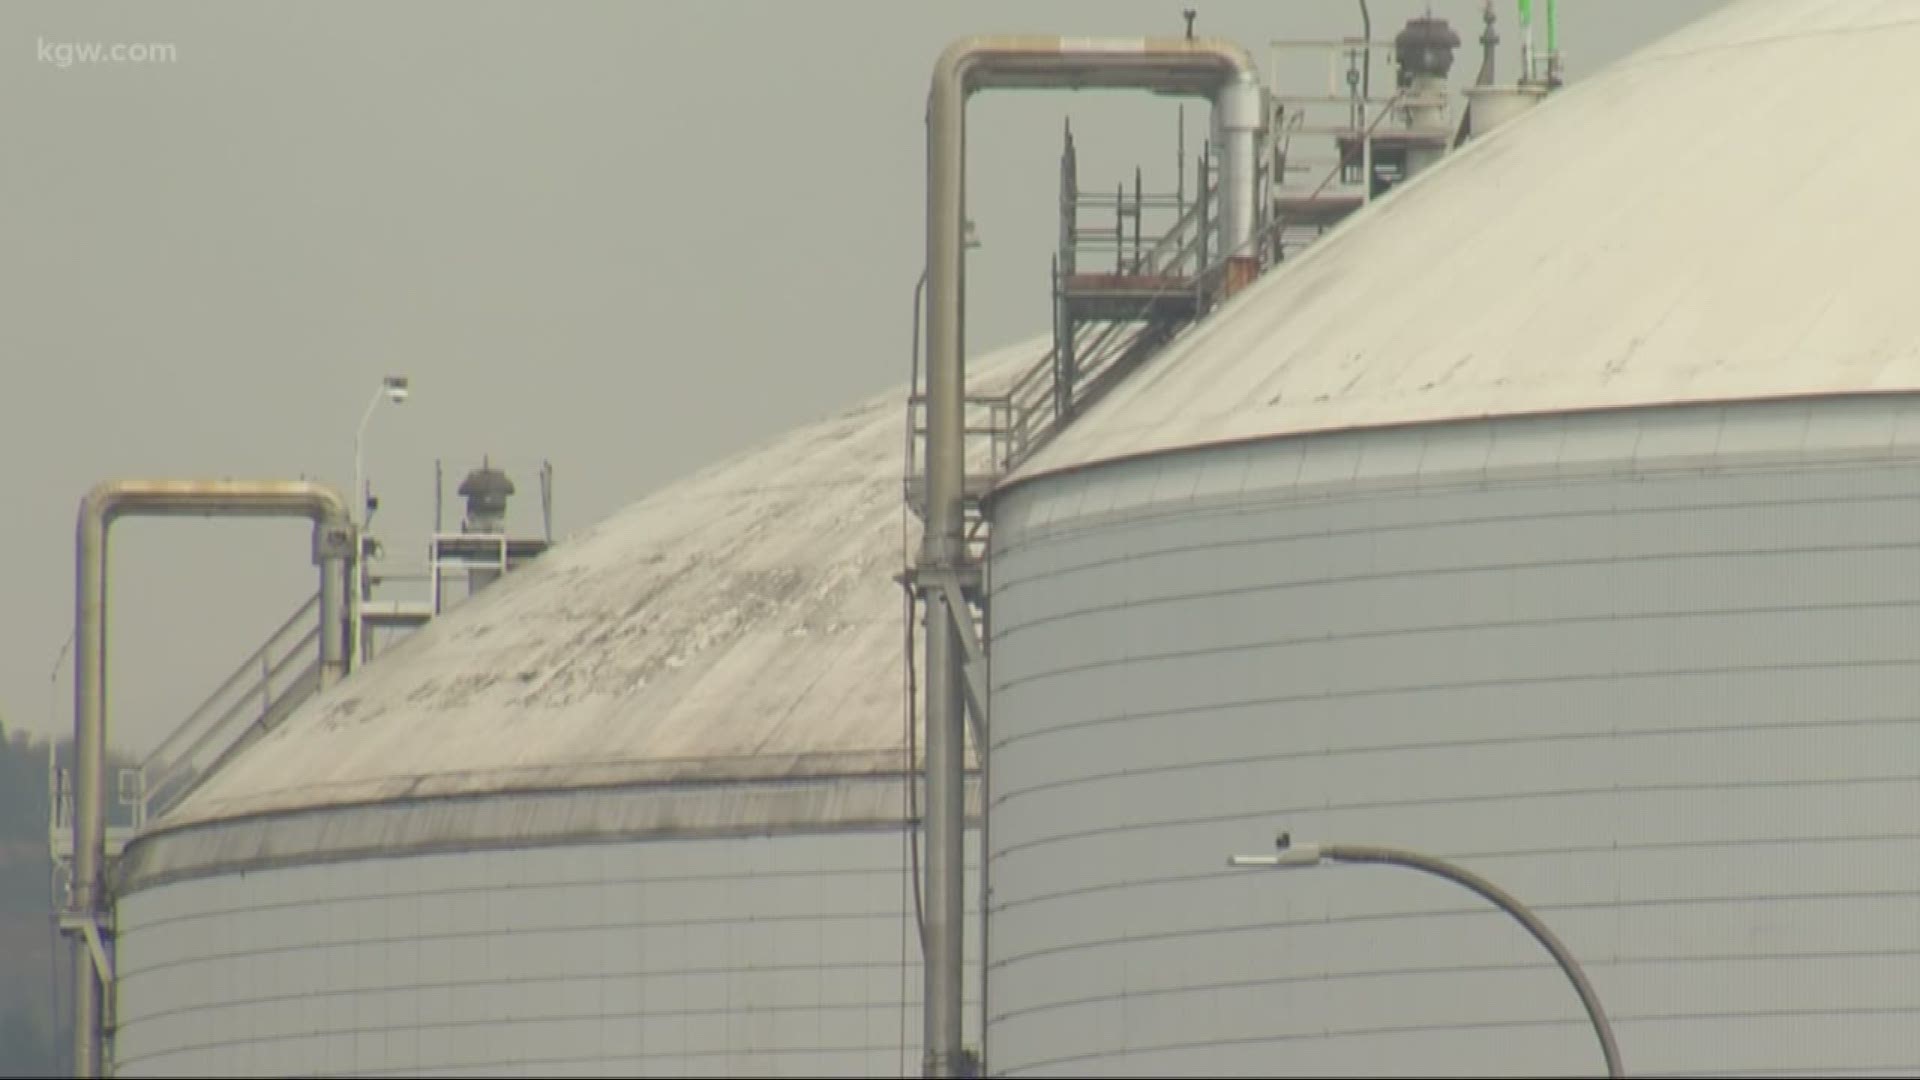 Community worries over anhydrous ammonia plan.